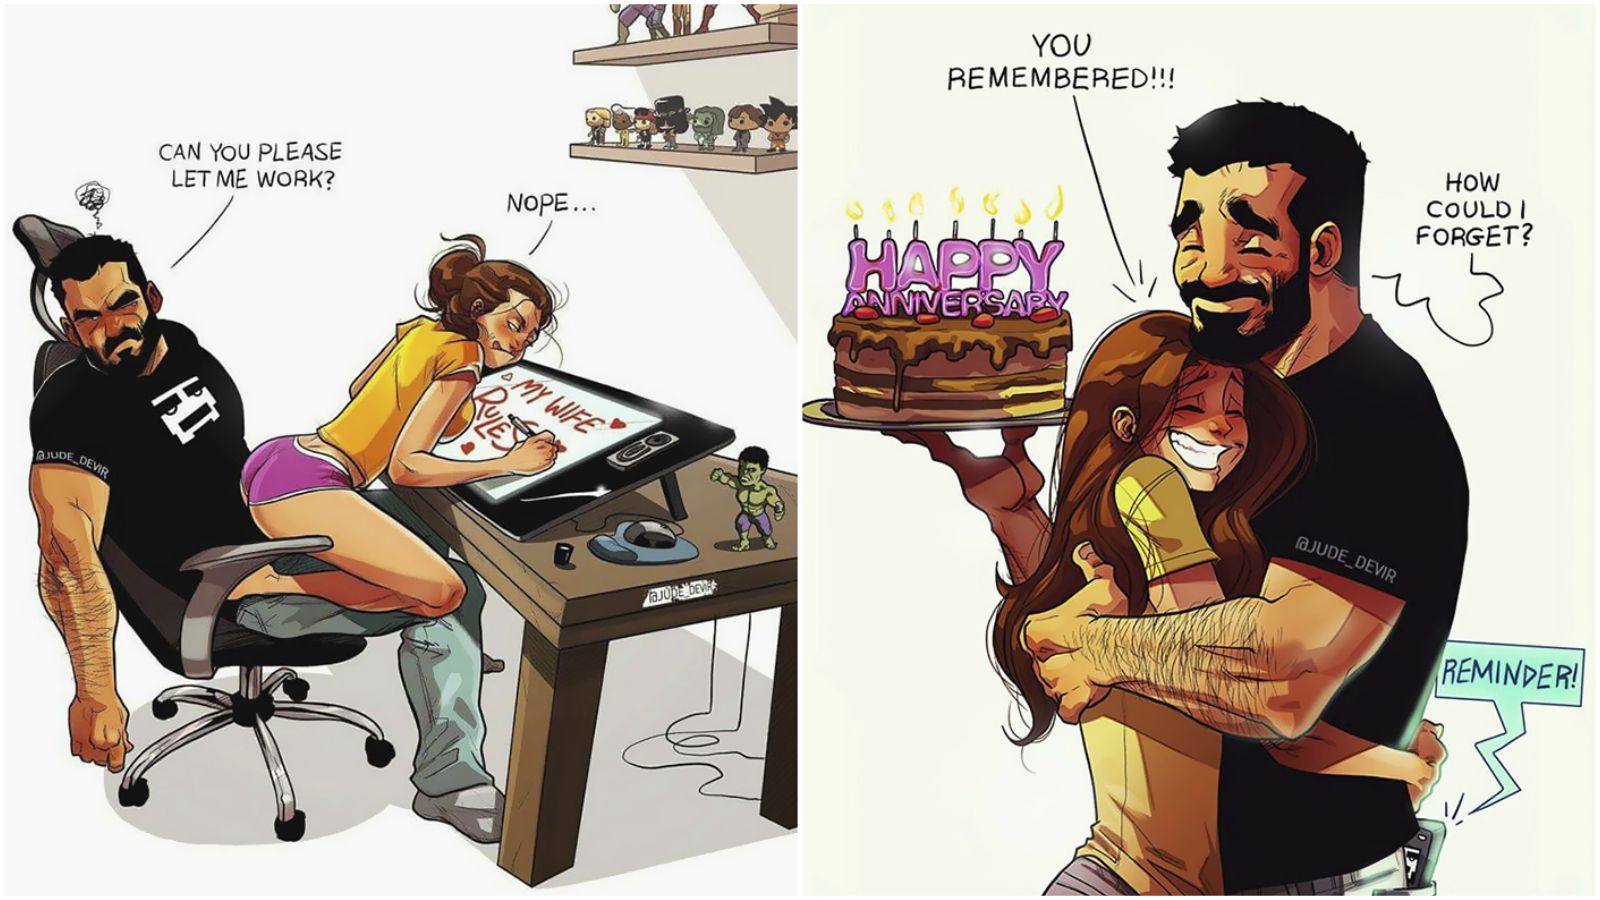 Comic Artist’s “One of Those Days” Series Perfectly Captures Everyday Life in a Relationship